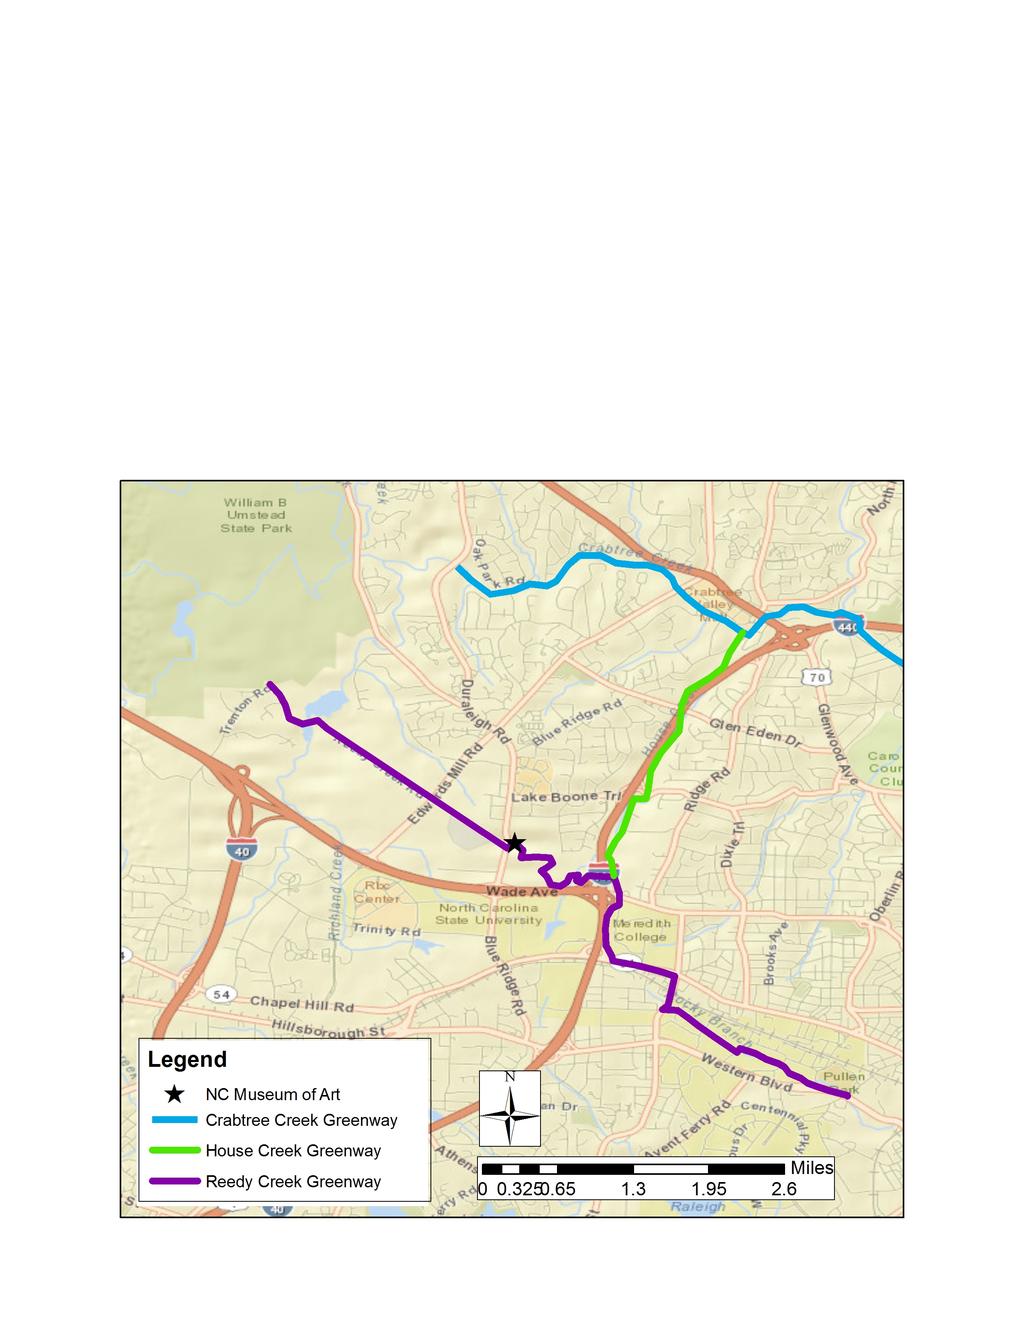 Figure 1. Map showing how the House Creek Greenway (green) connects the Crabtree Creek Greenway (blue) to the Reedy Creek Greenway (purple). The star indicates the location of the NCMA.